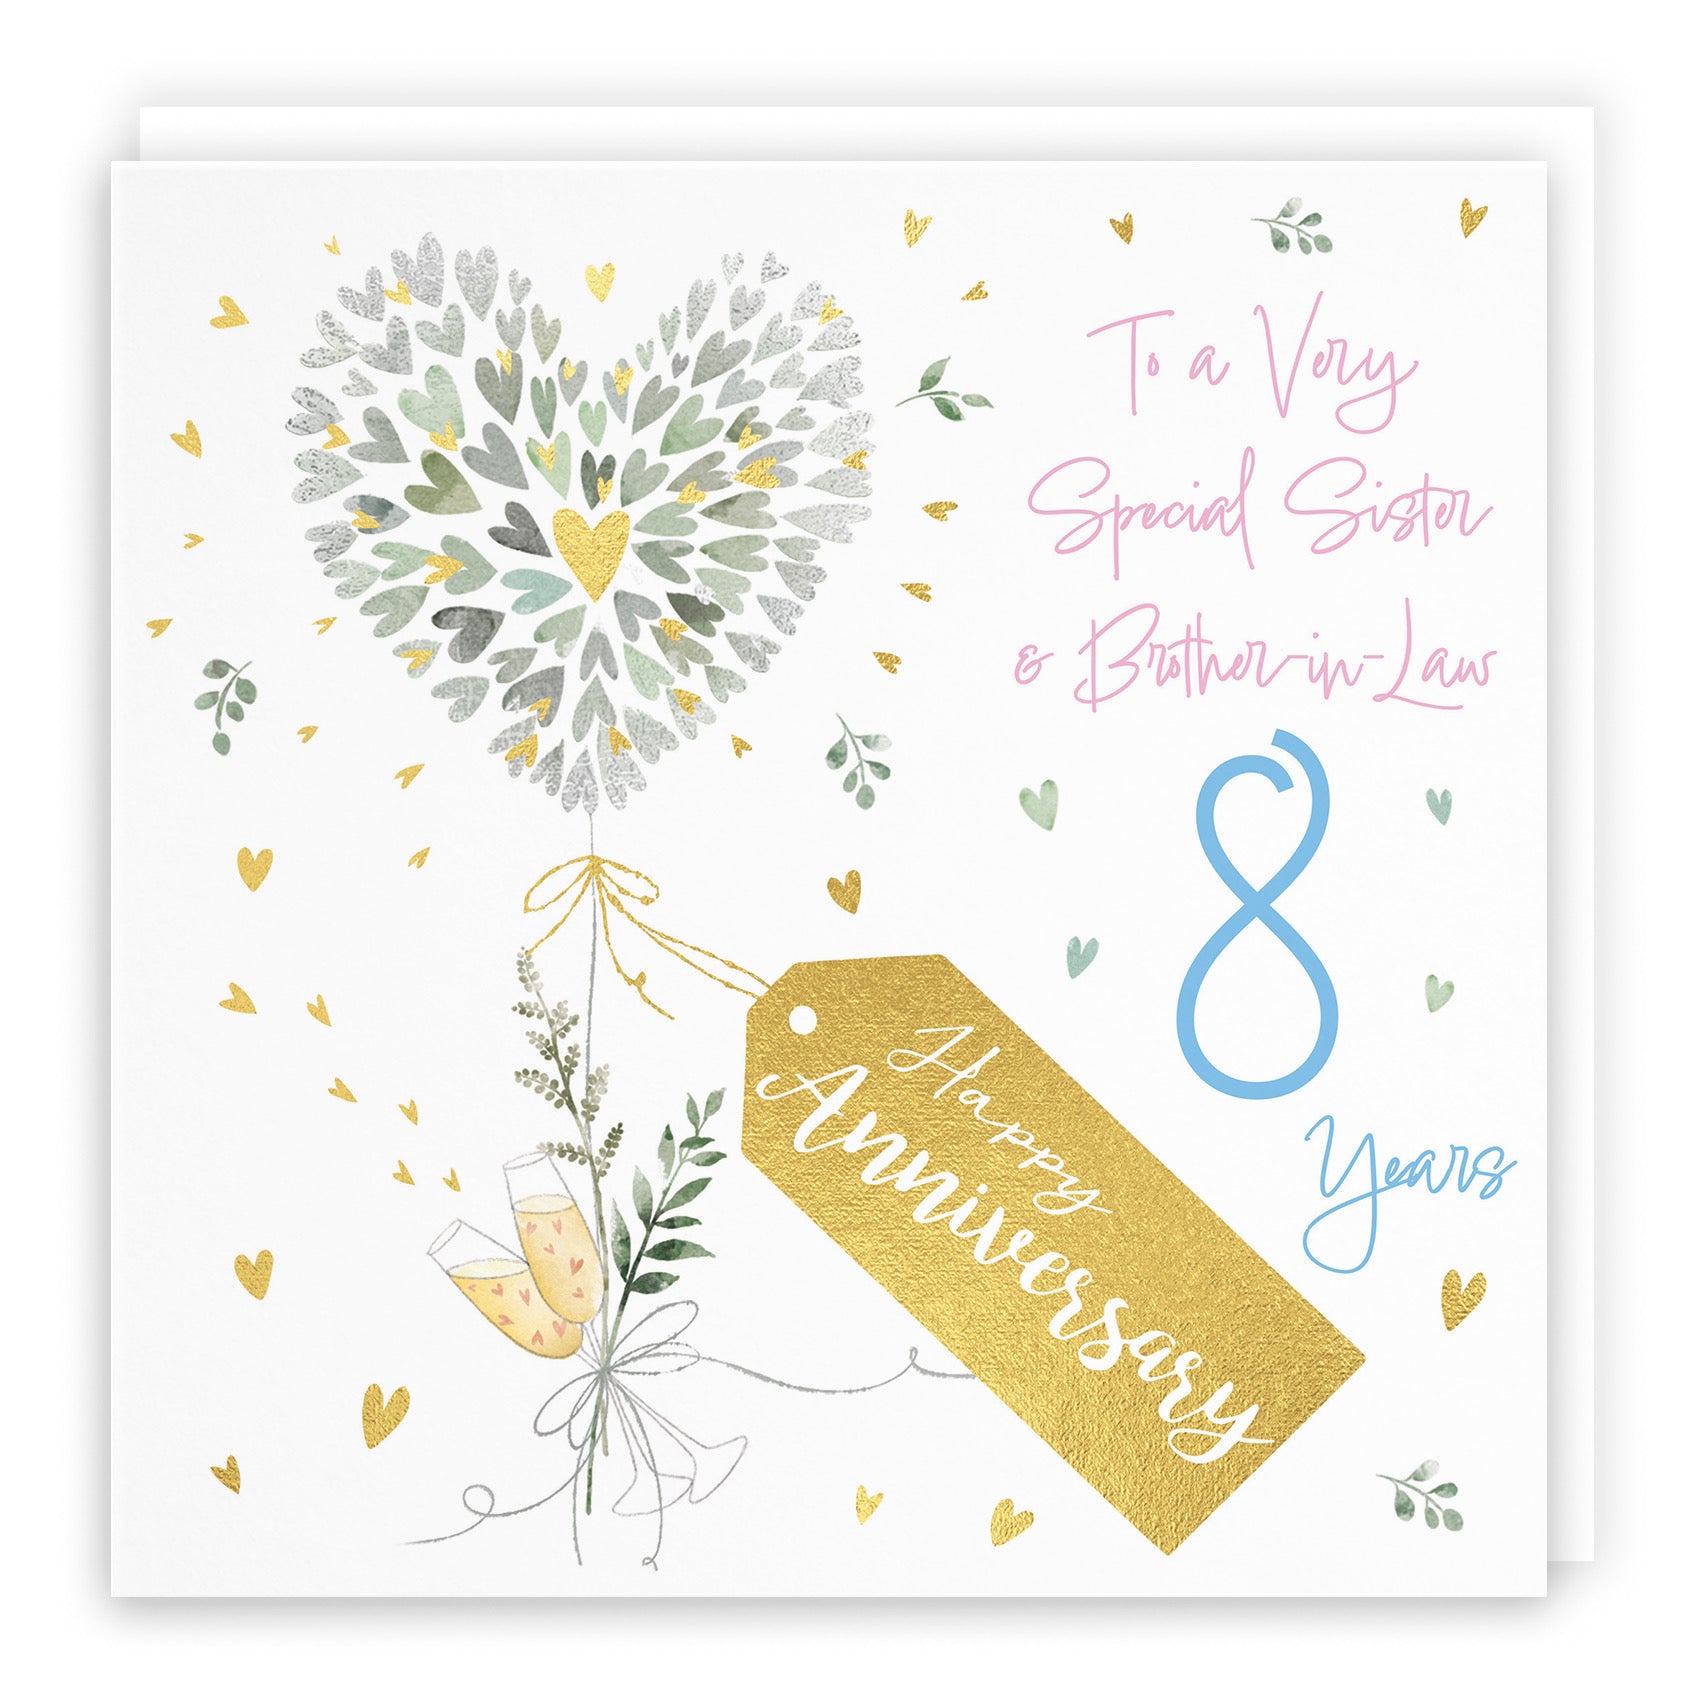 Sister And Brother-in-Law 8th Anniversary Card Contemporary Hearts Milo's Gallery - Default Title (B0CKJ77JW3)